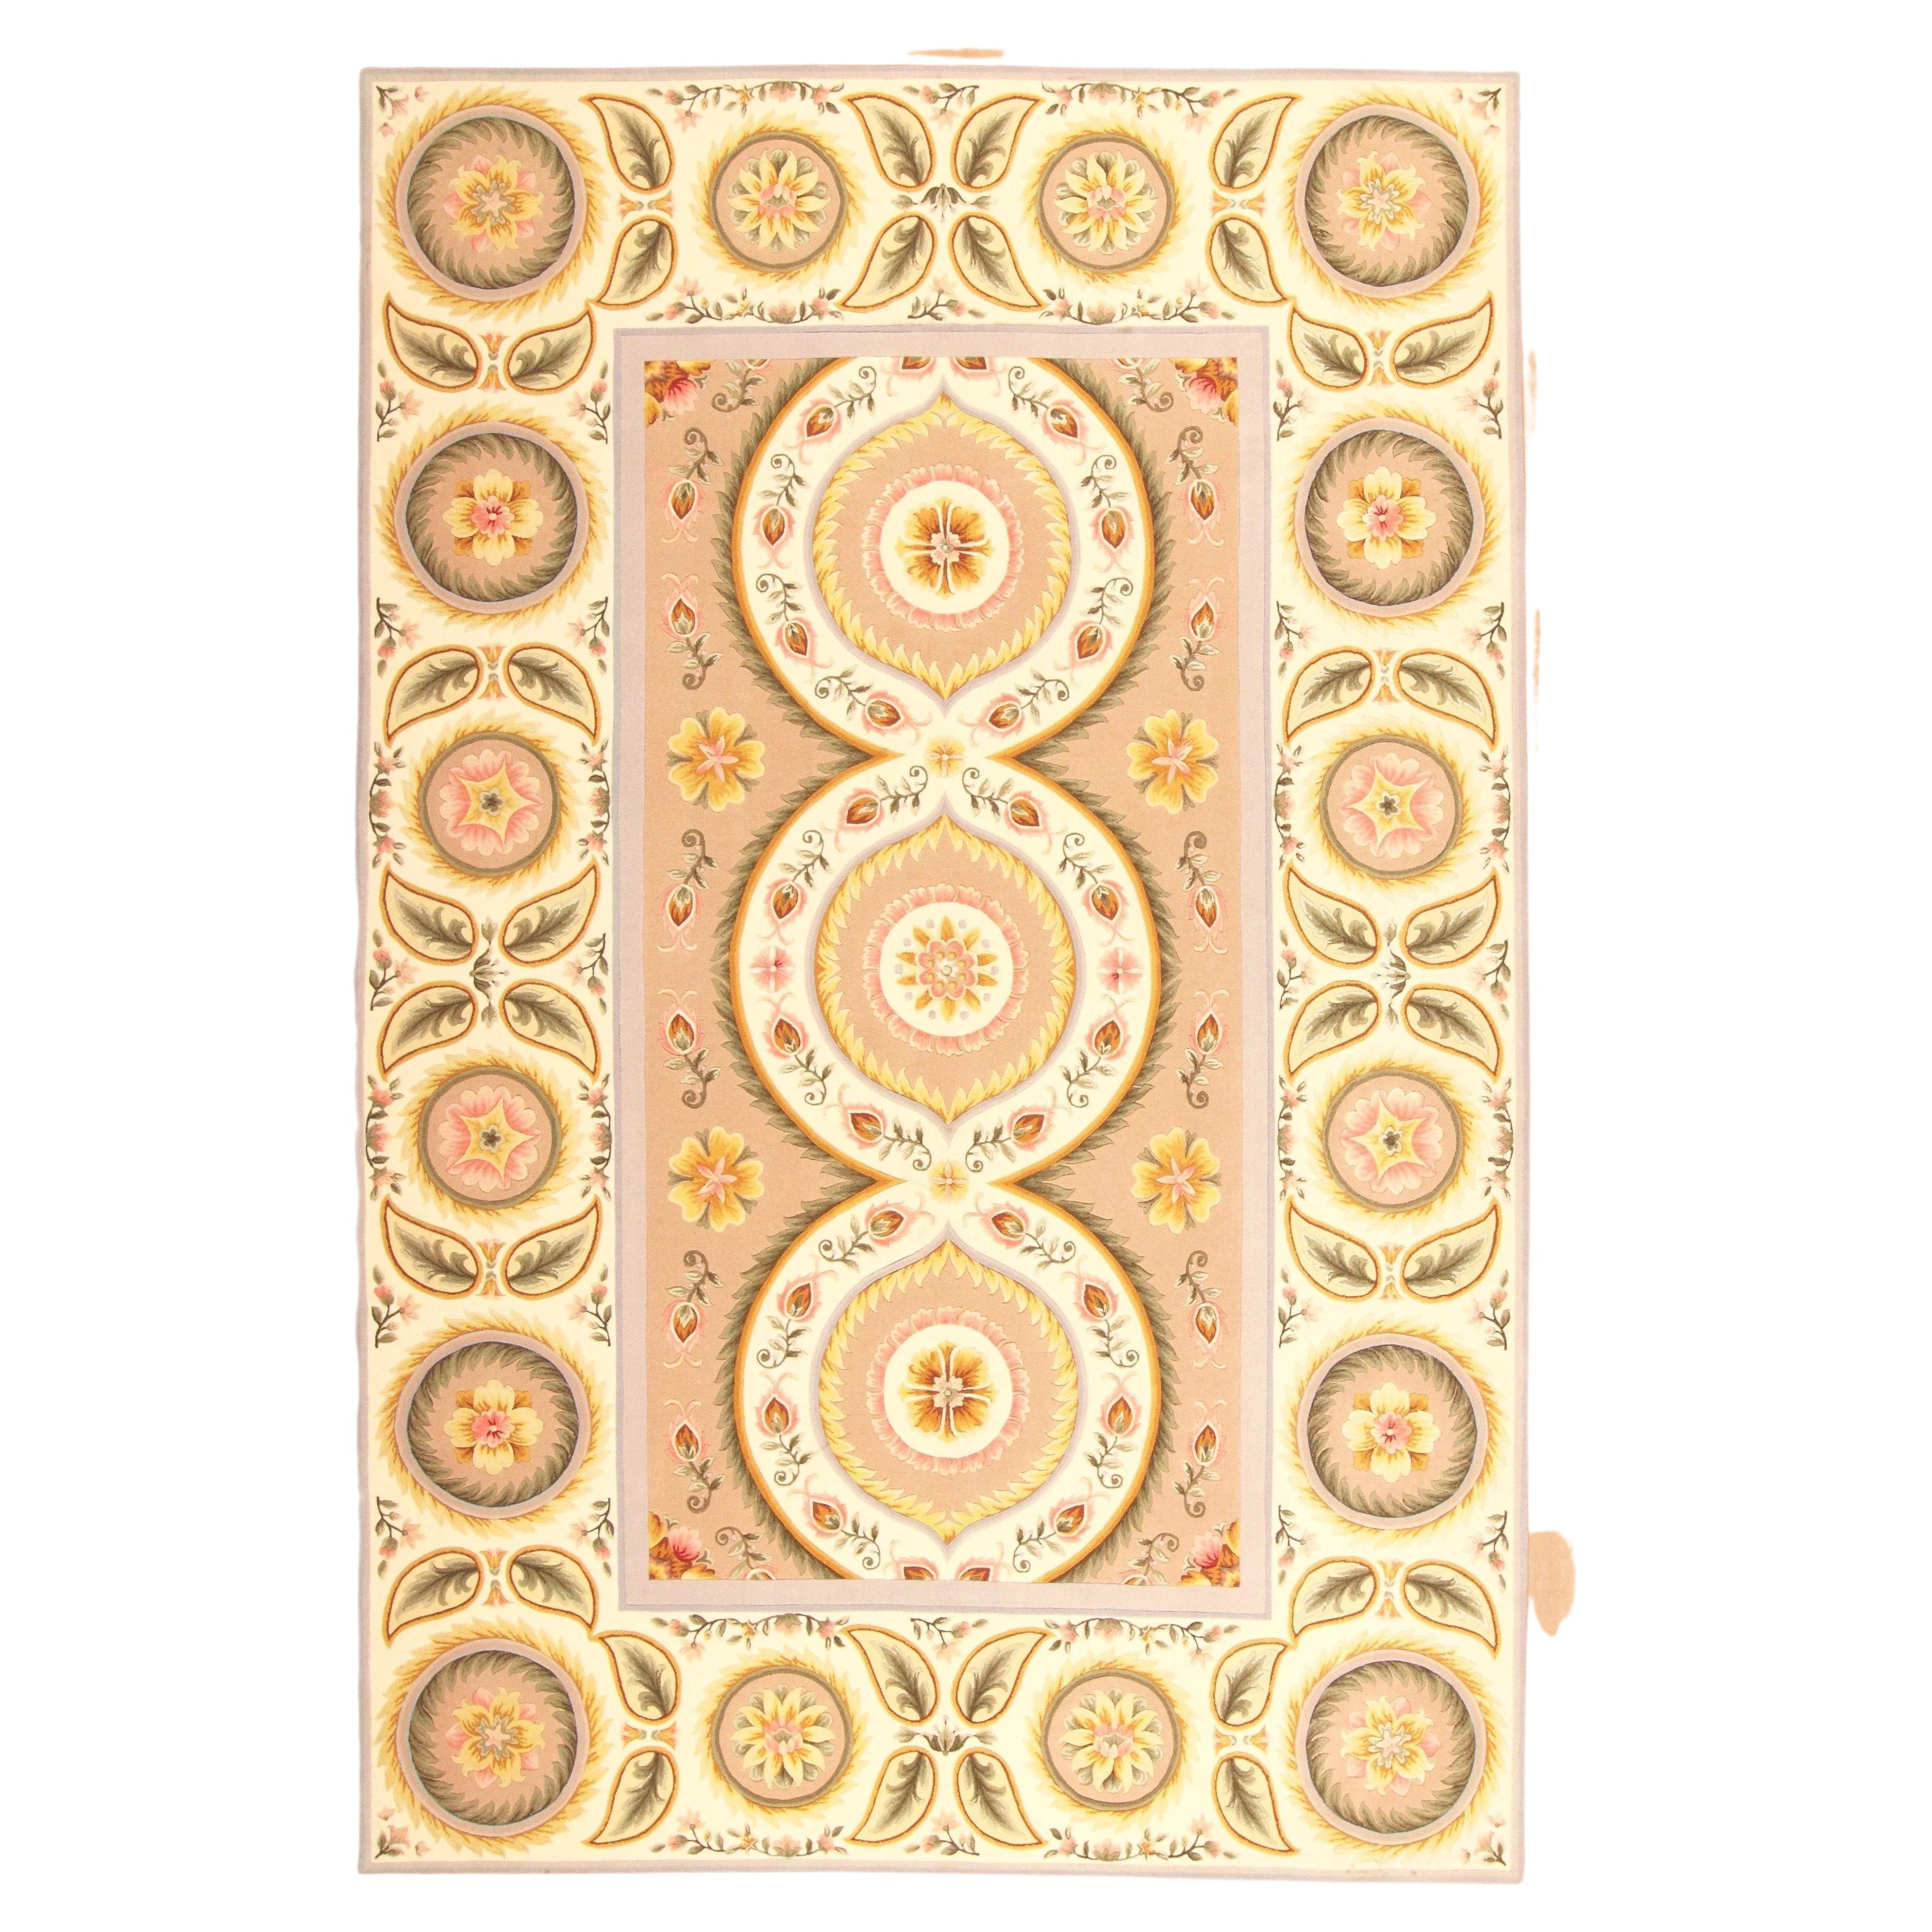 'Suzani Three Flowers' Rug For Sale